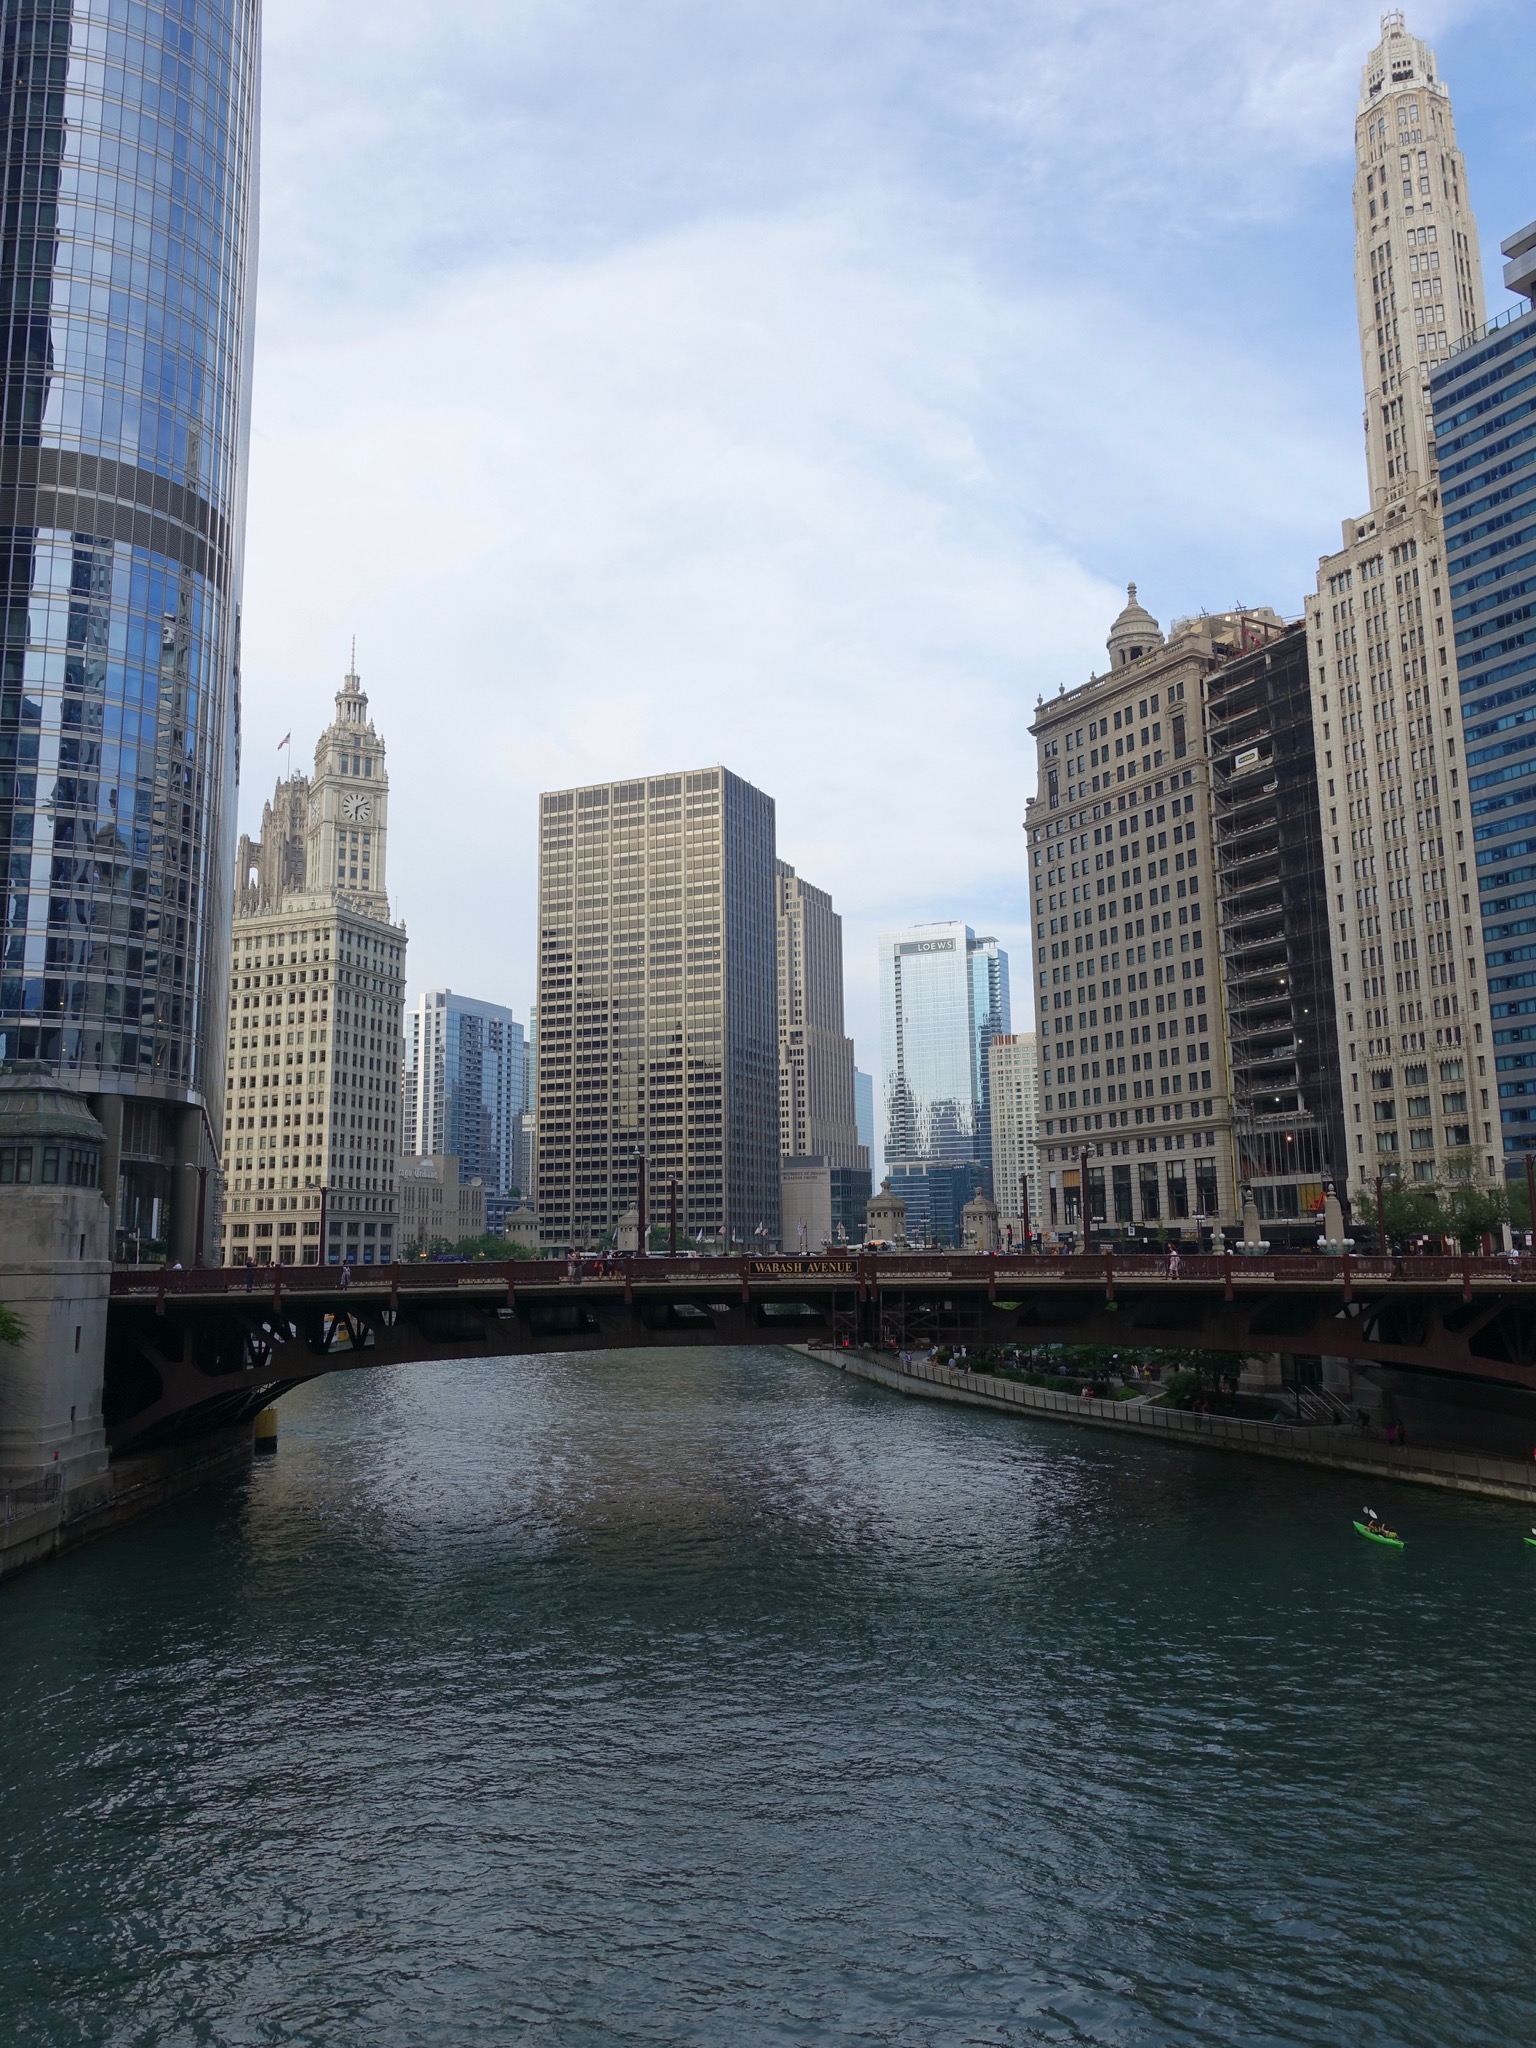 Photo 86 of 135 from the album Highlights Chicago 2015.